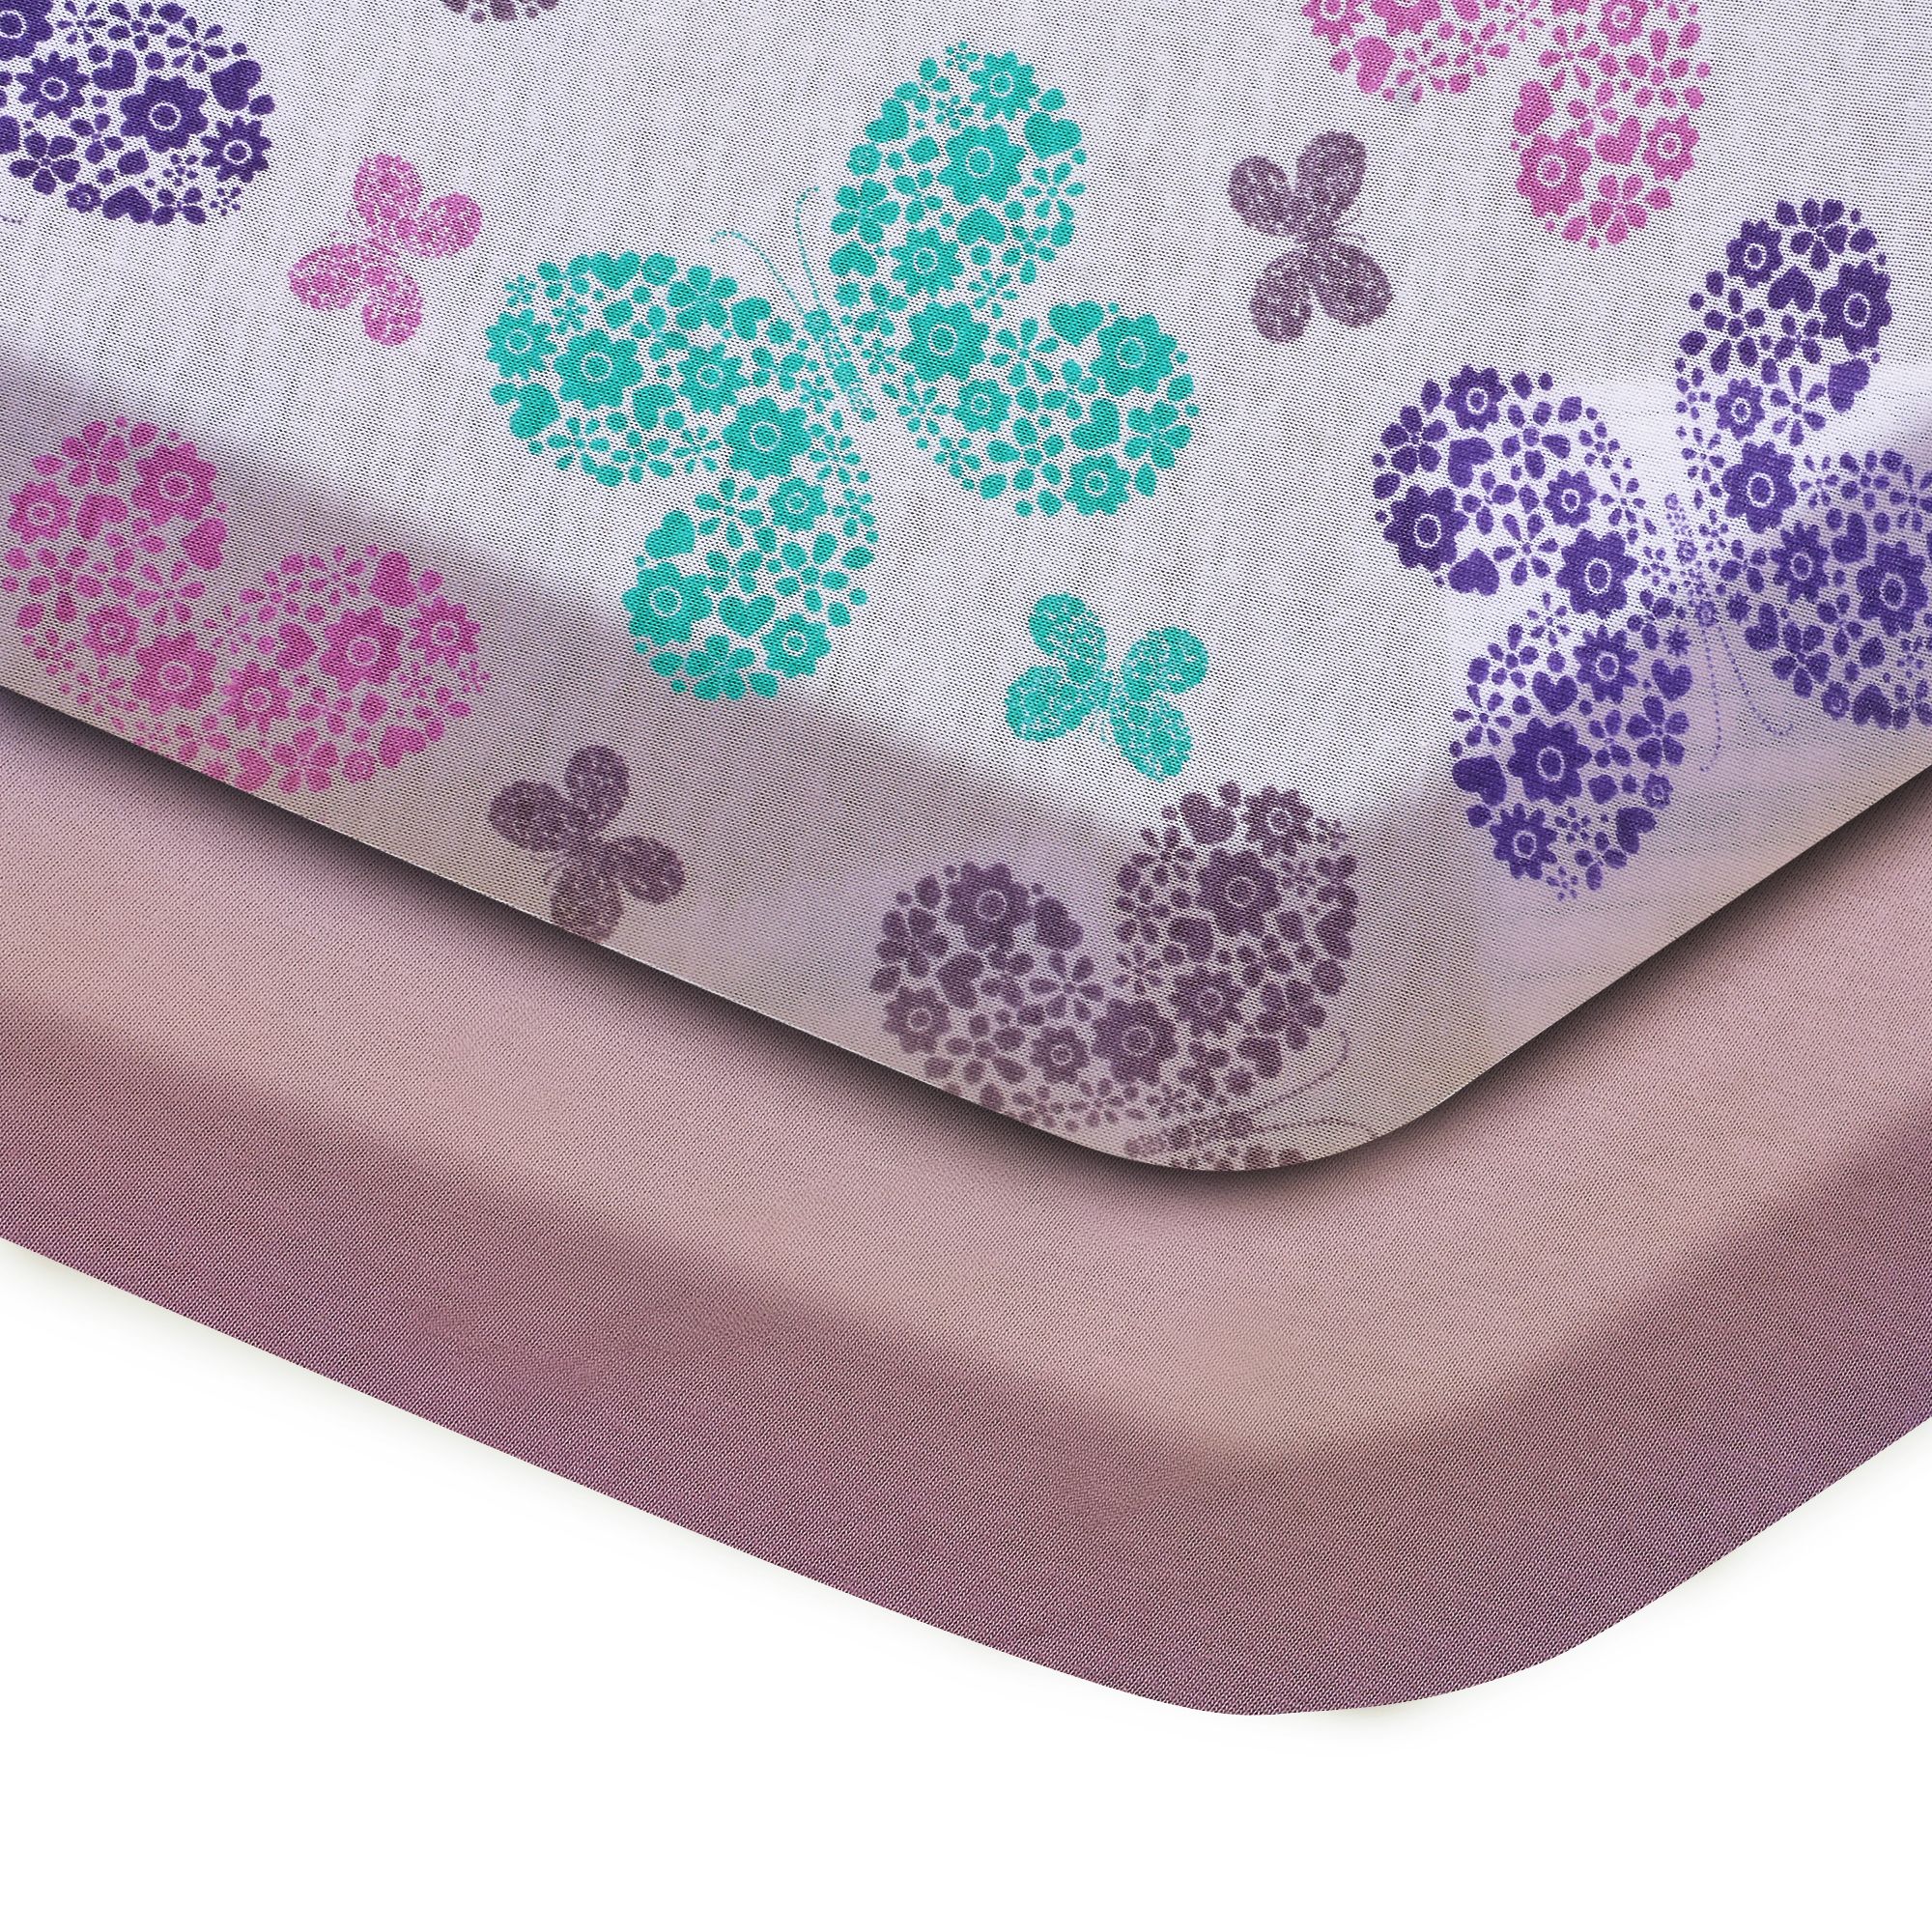 Auraa Baby Fitted Crib Sheets, Butterfly, 2pk - image 1 of 2